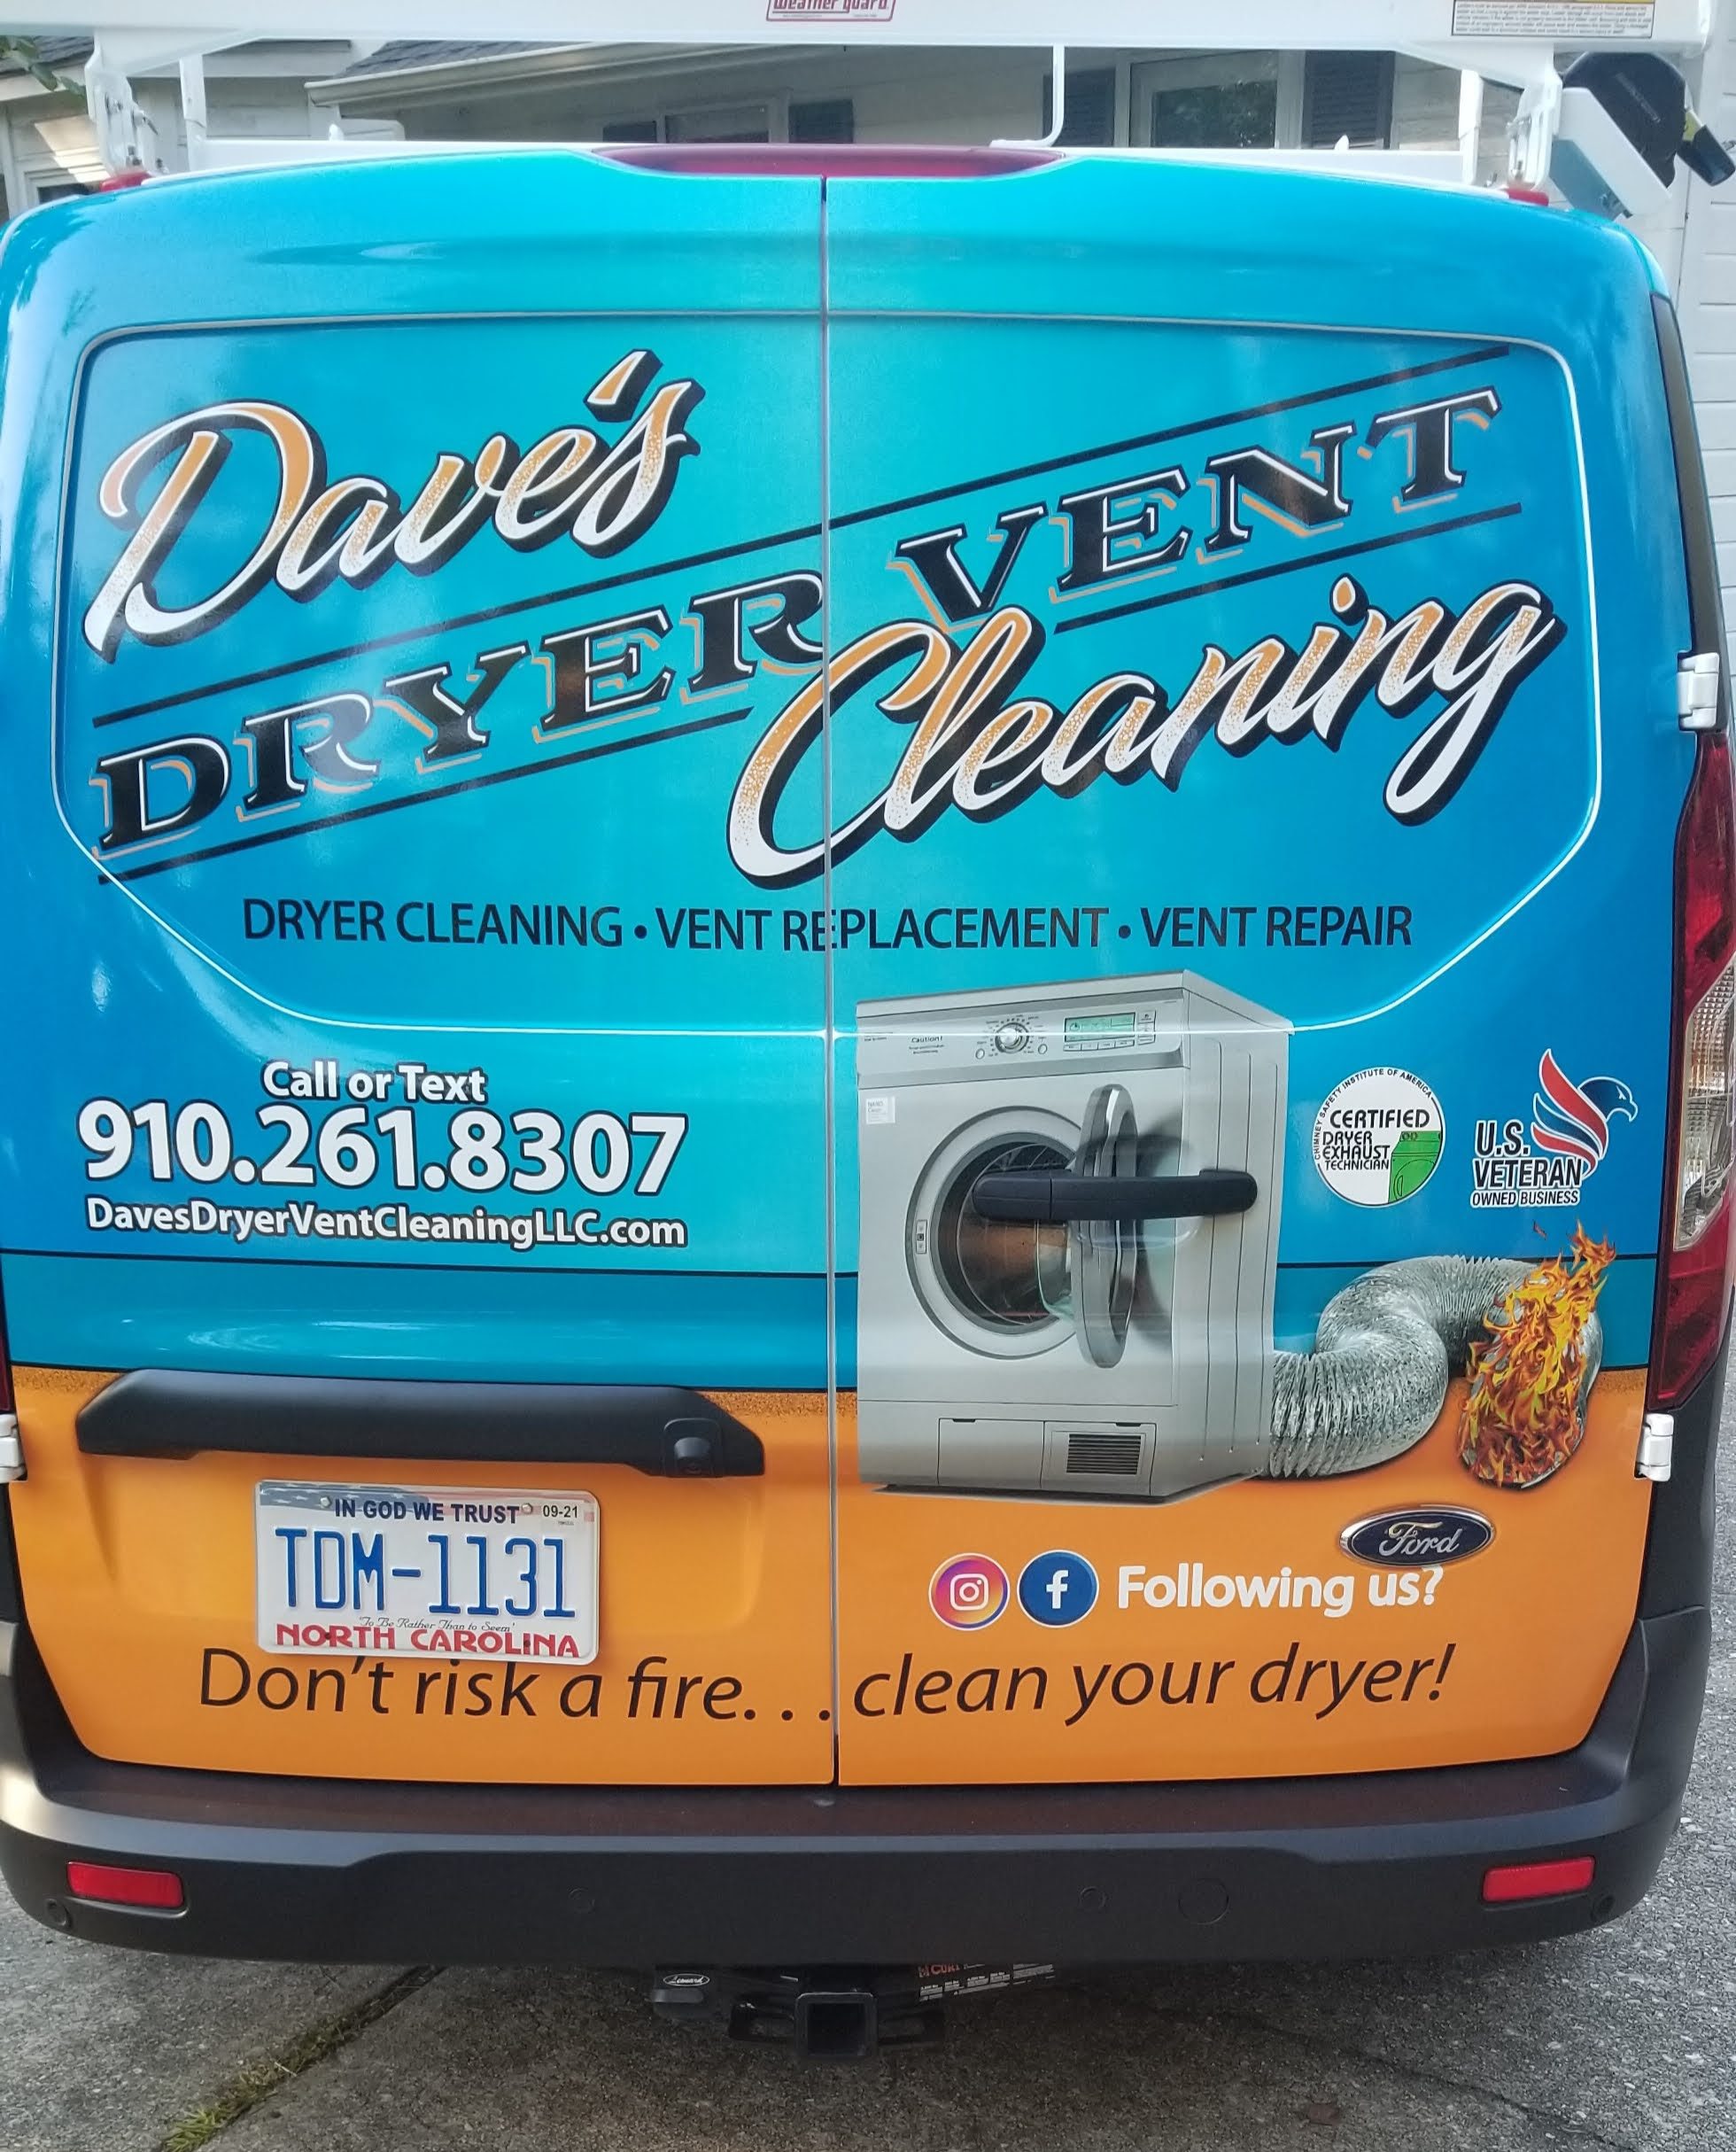 Daves's Dryer Vent Cleaning Service